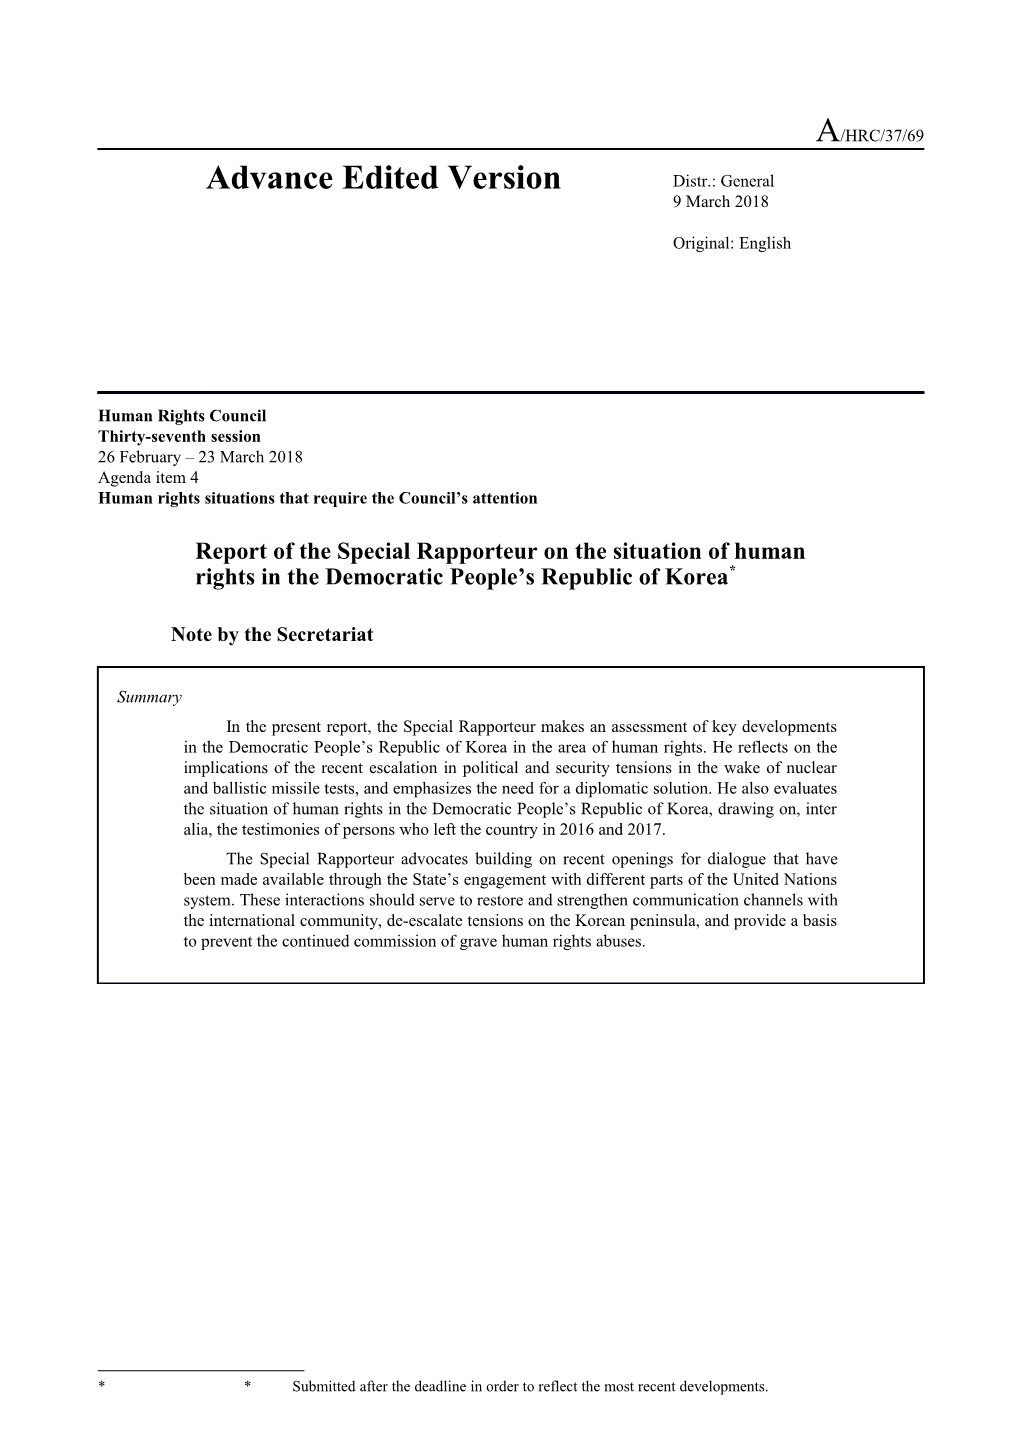 Report of the Special Rapporteur on the Situation of Human Rights in the Democratic People's